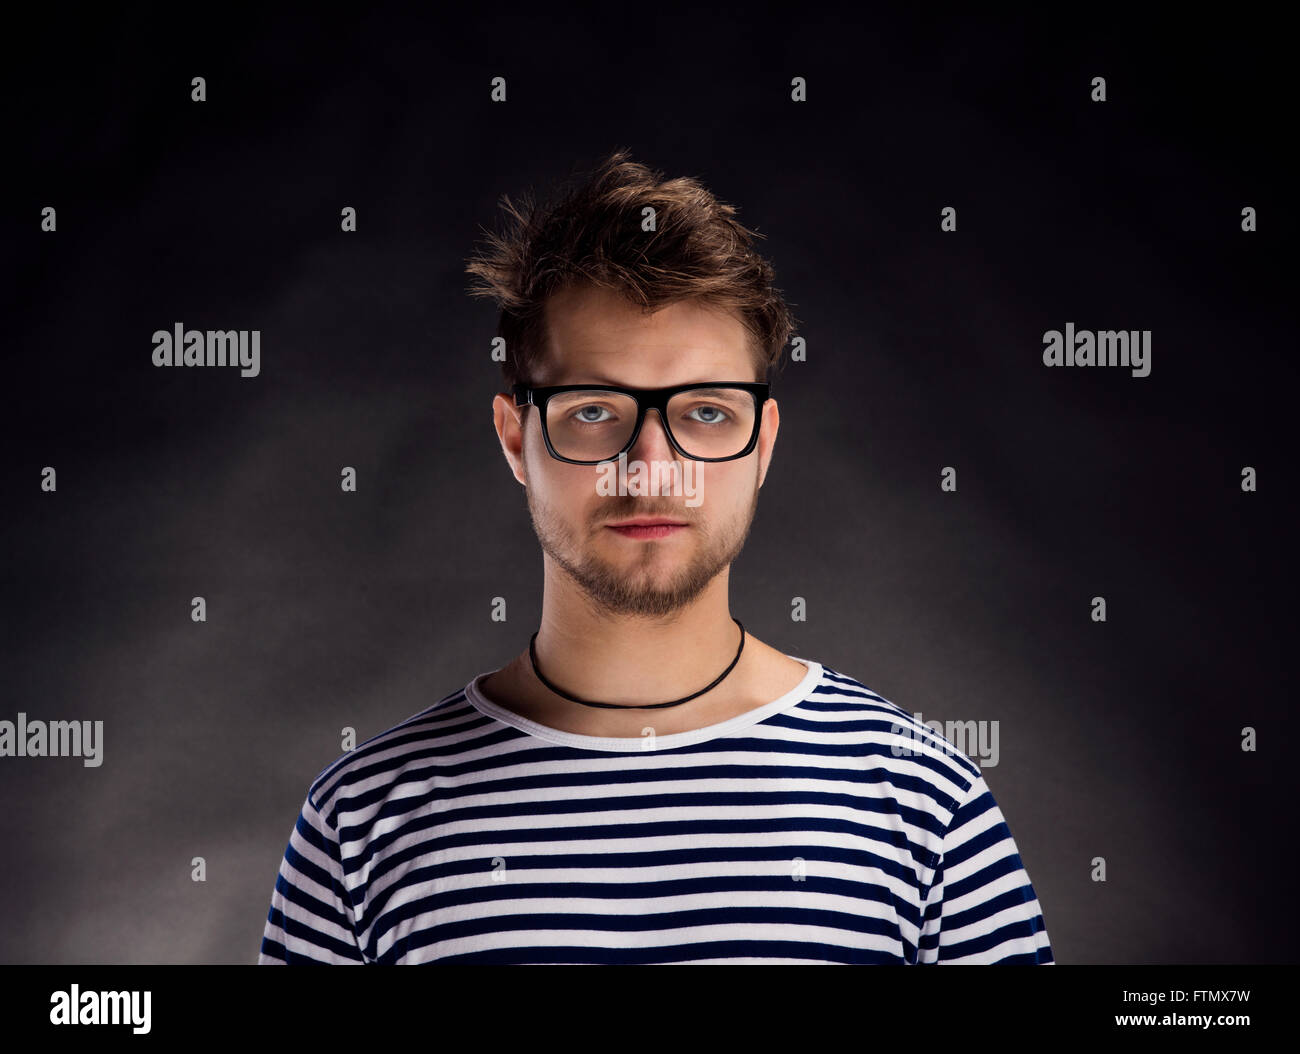 Man in striped t-shirt and eyeglasses against black background. Stock Photo